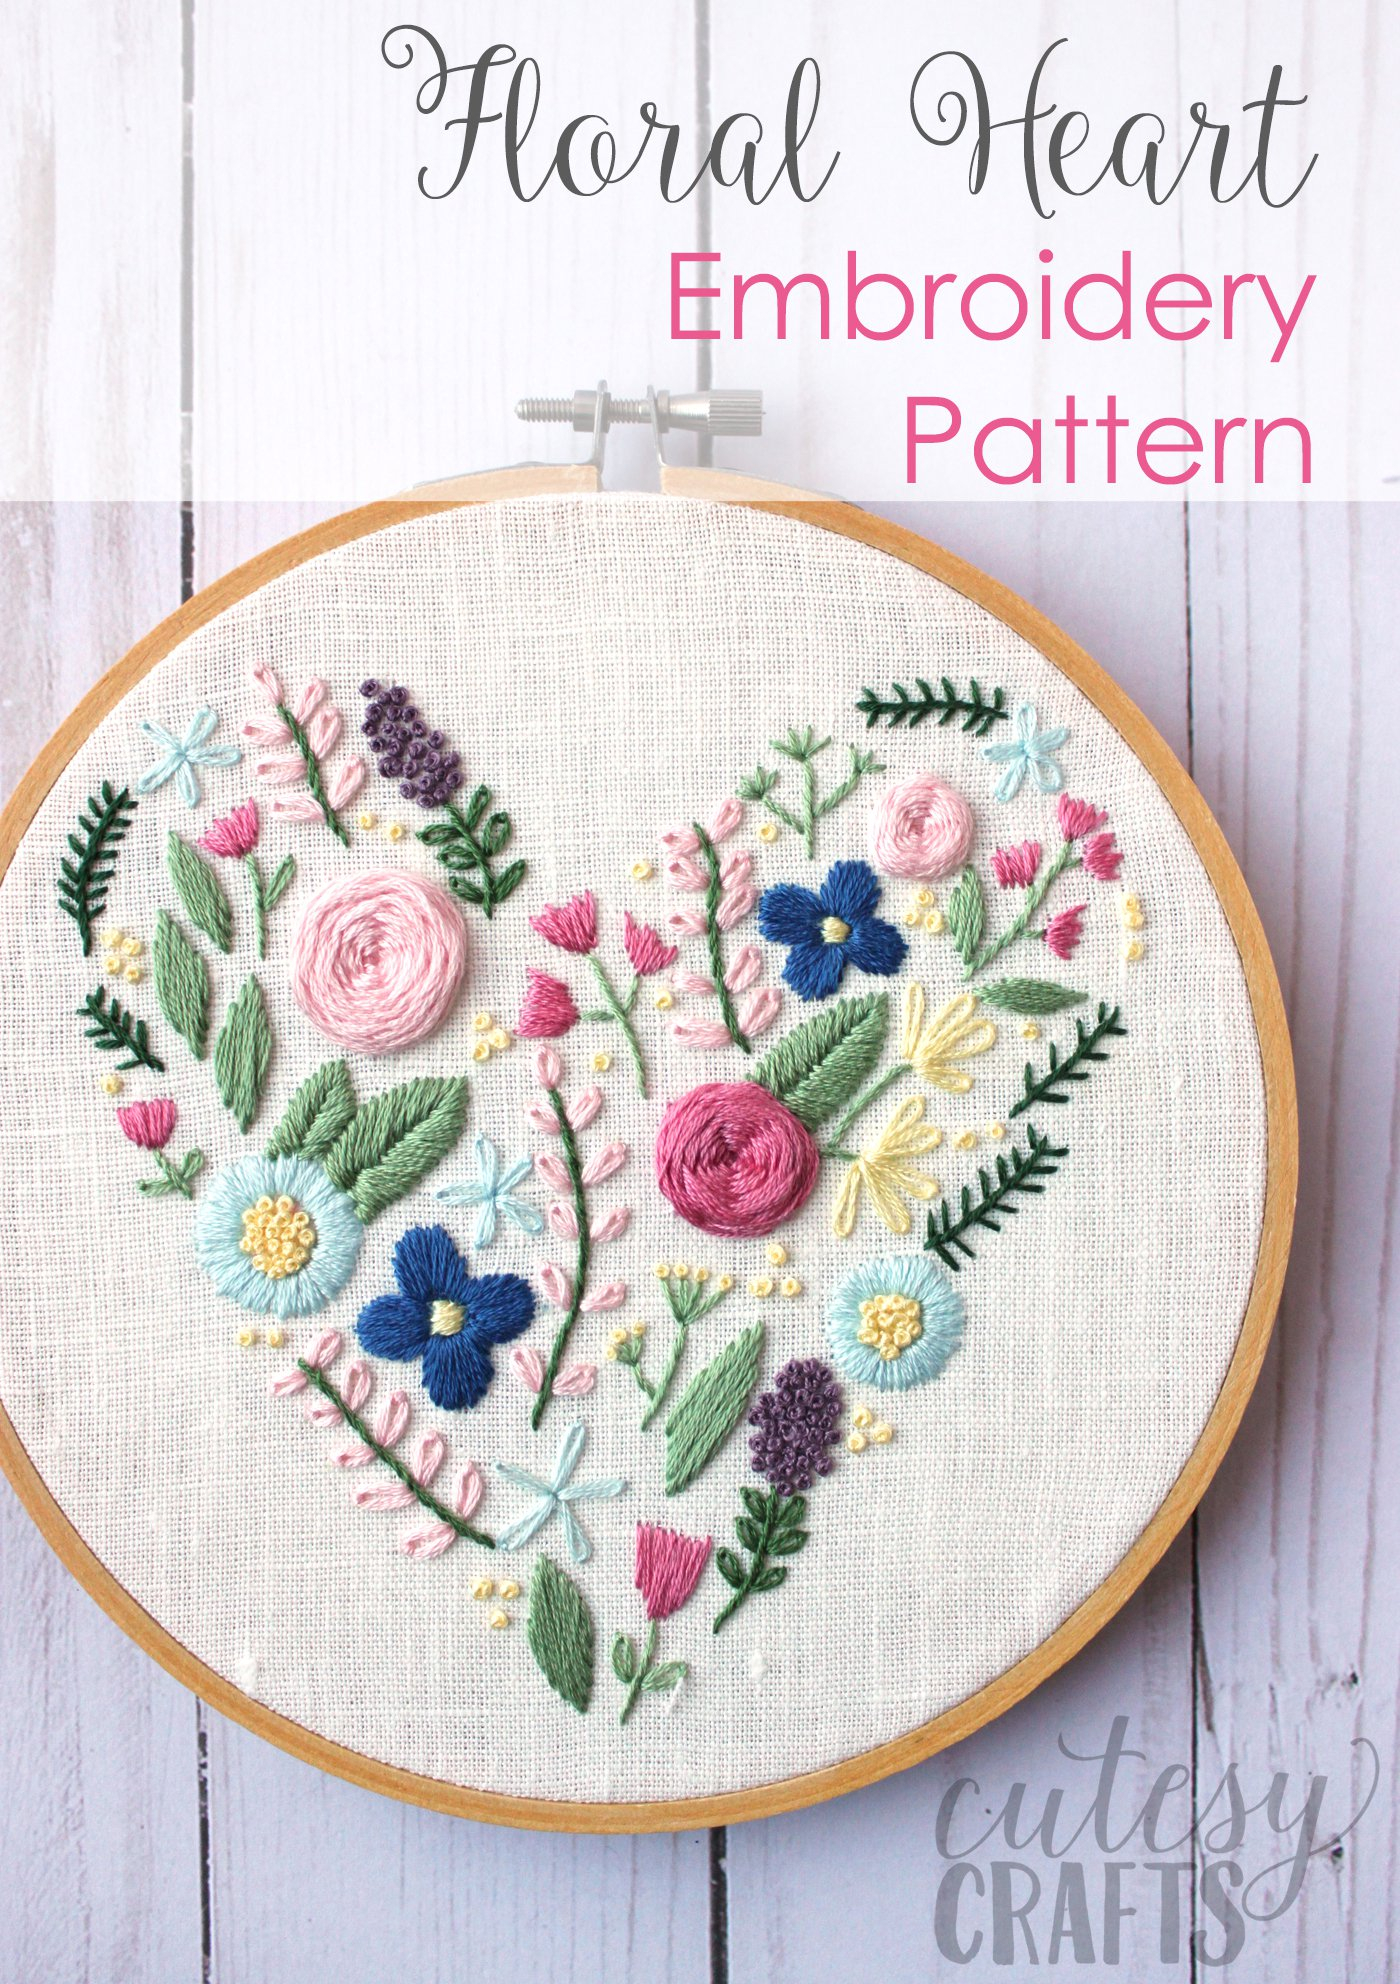 Flower Embroidery Patterns Floral Heart Hand Embroidery Pattern The Polka Dot Chair